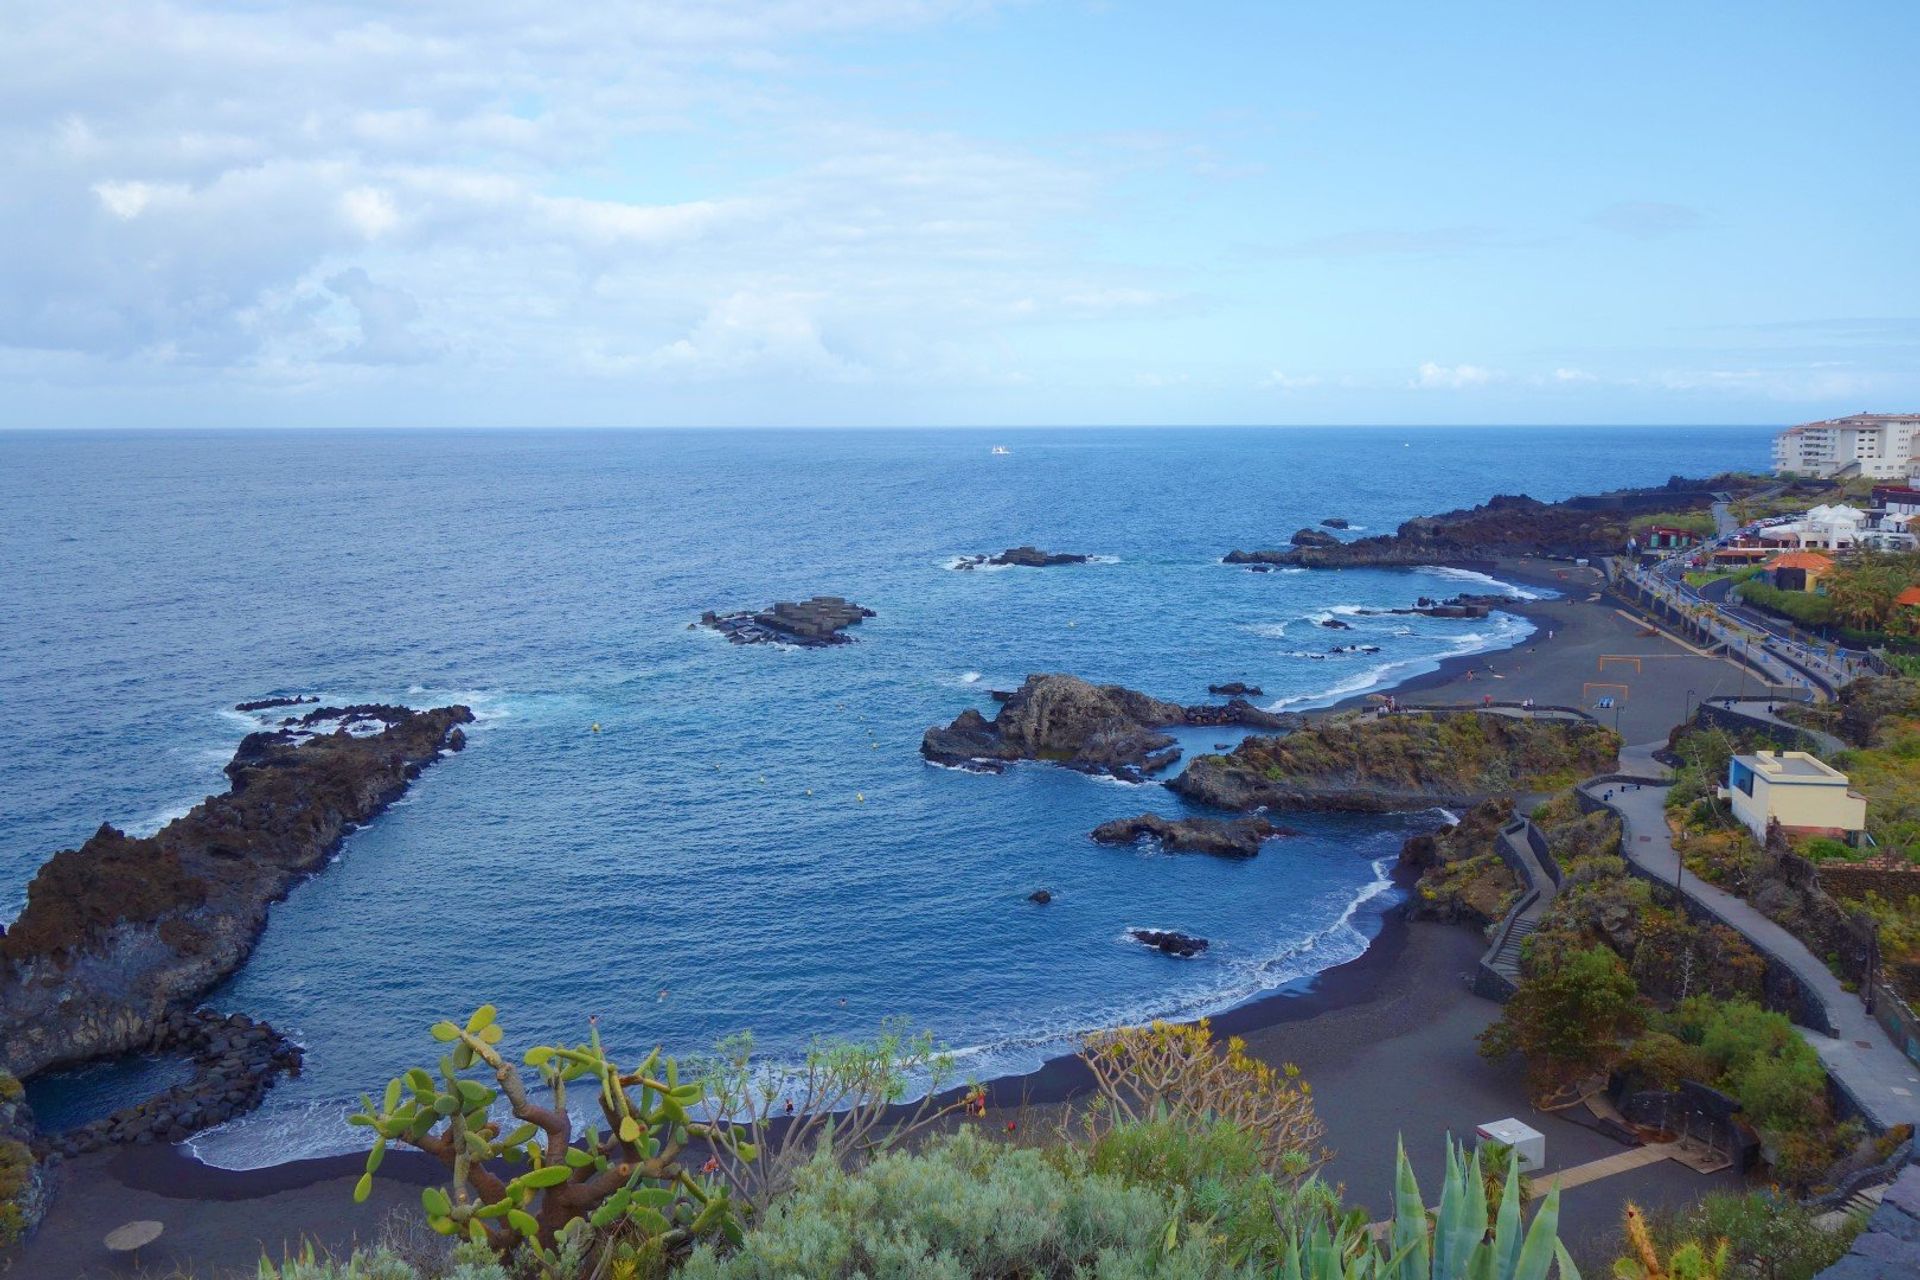 Boasting otherwordly black sand, find your own slice of paradise on Los Cancajos beach